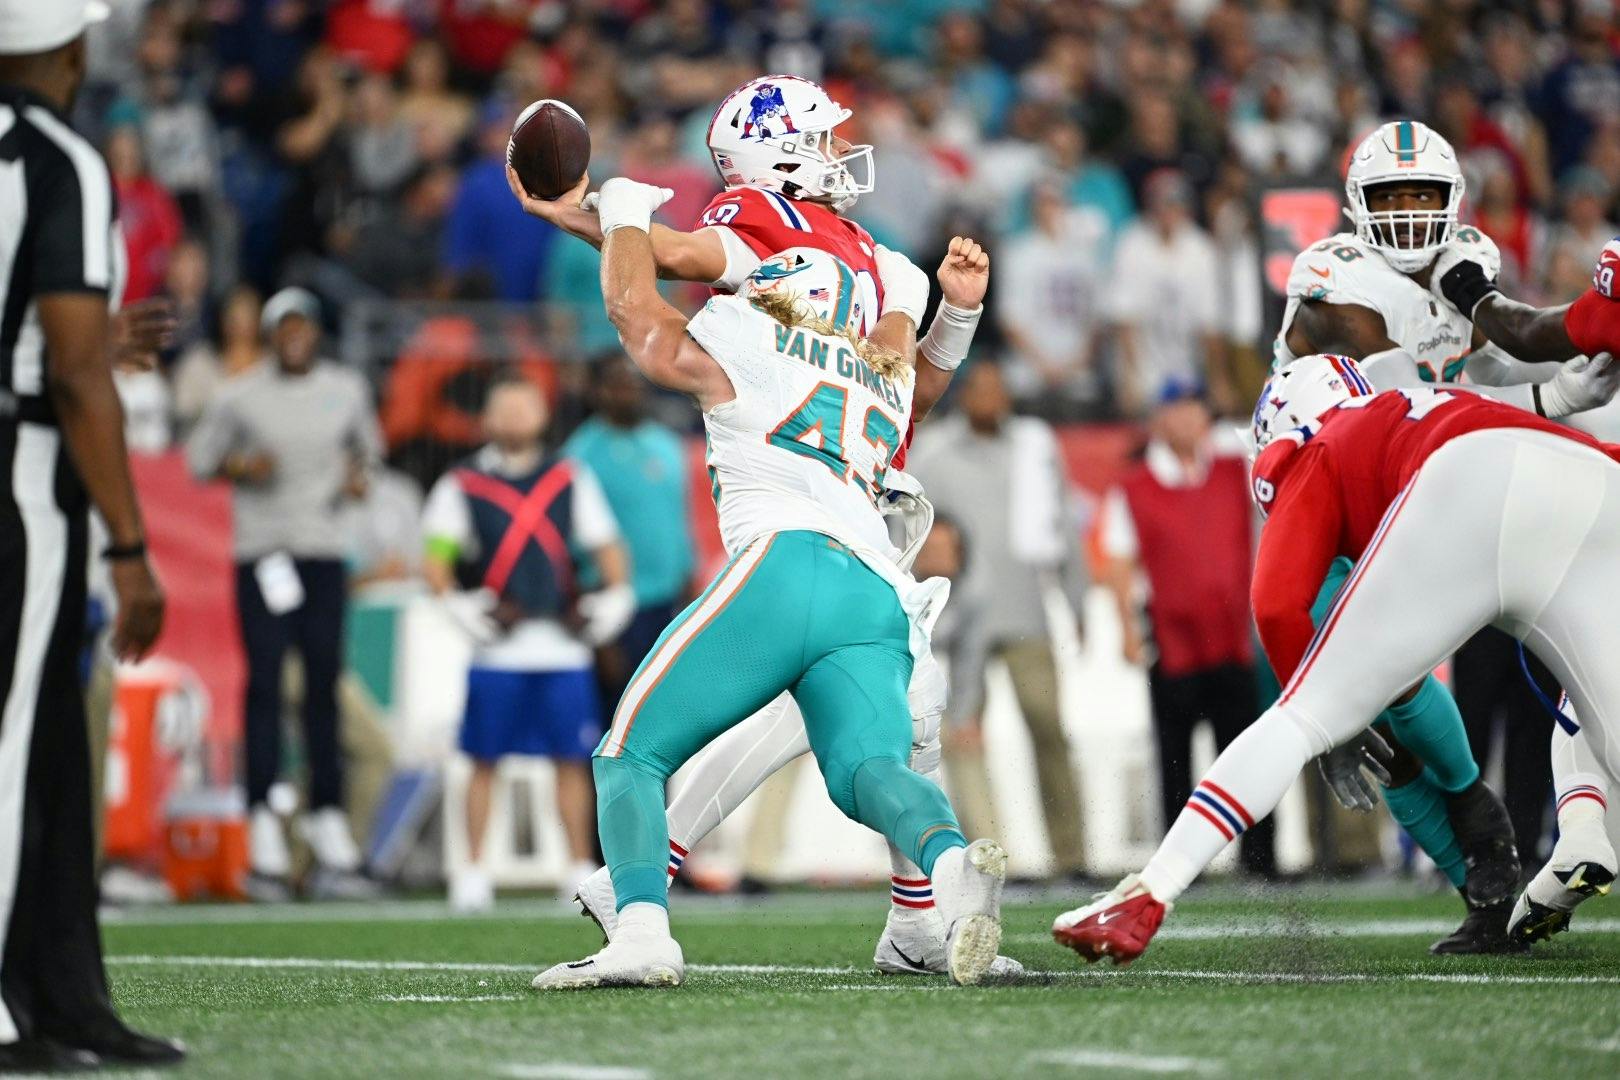 Bedard breaks down the Patriots’ loss to the Dolphins with The SportsHub